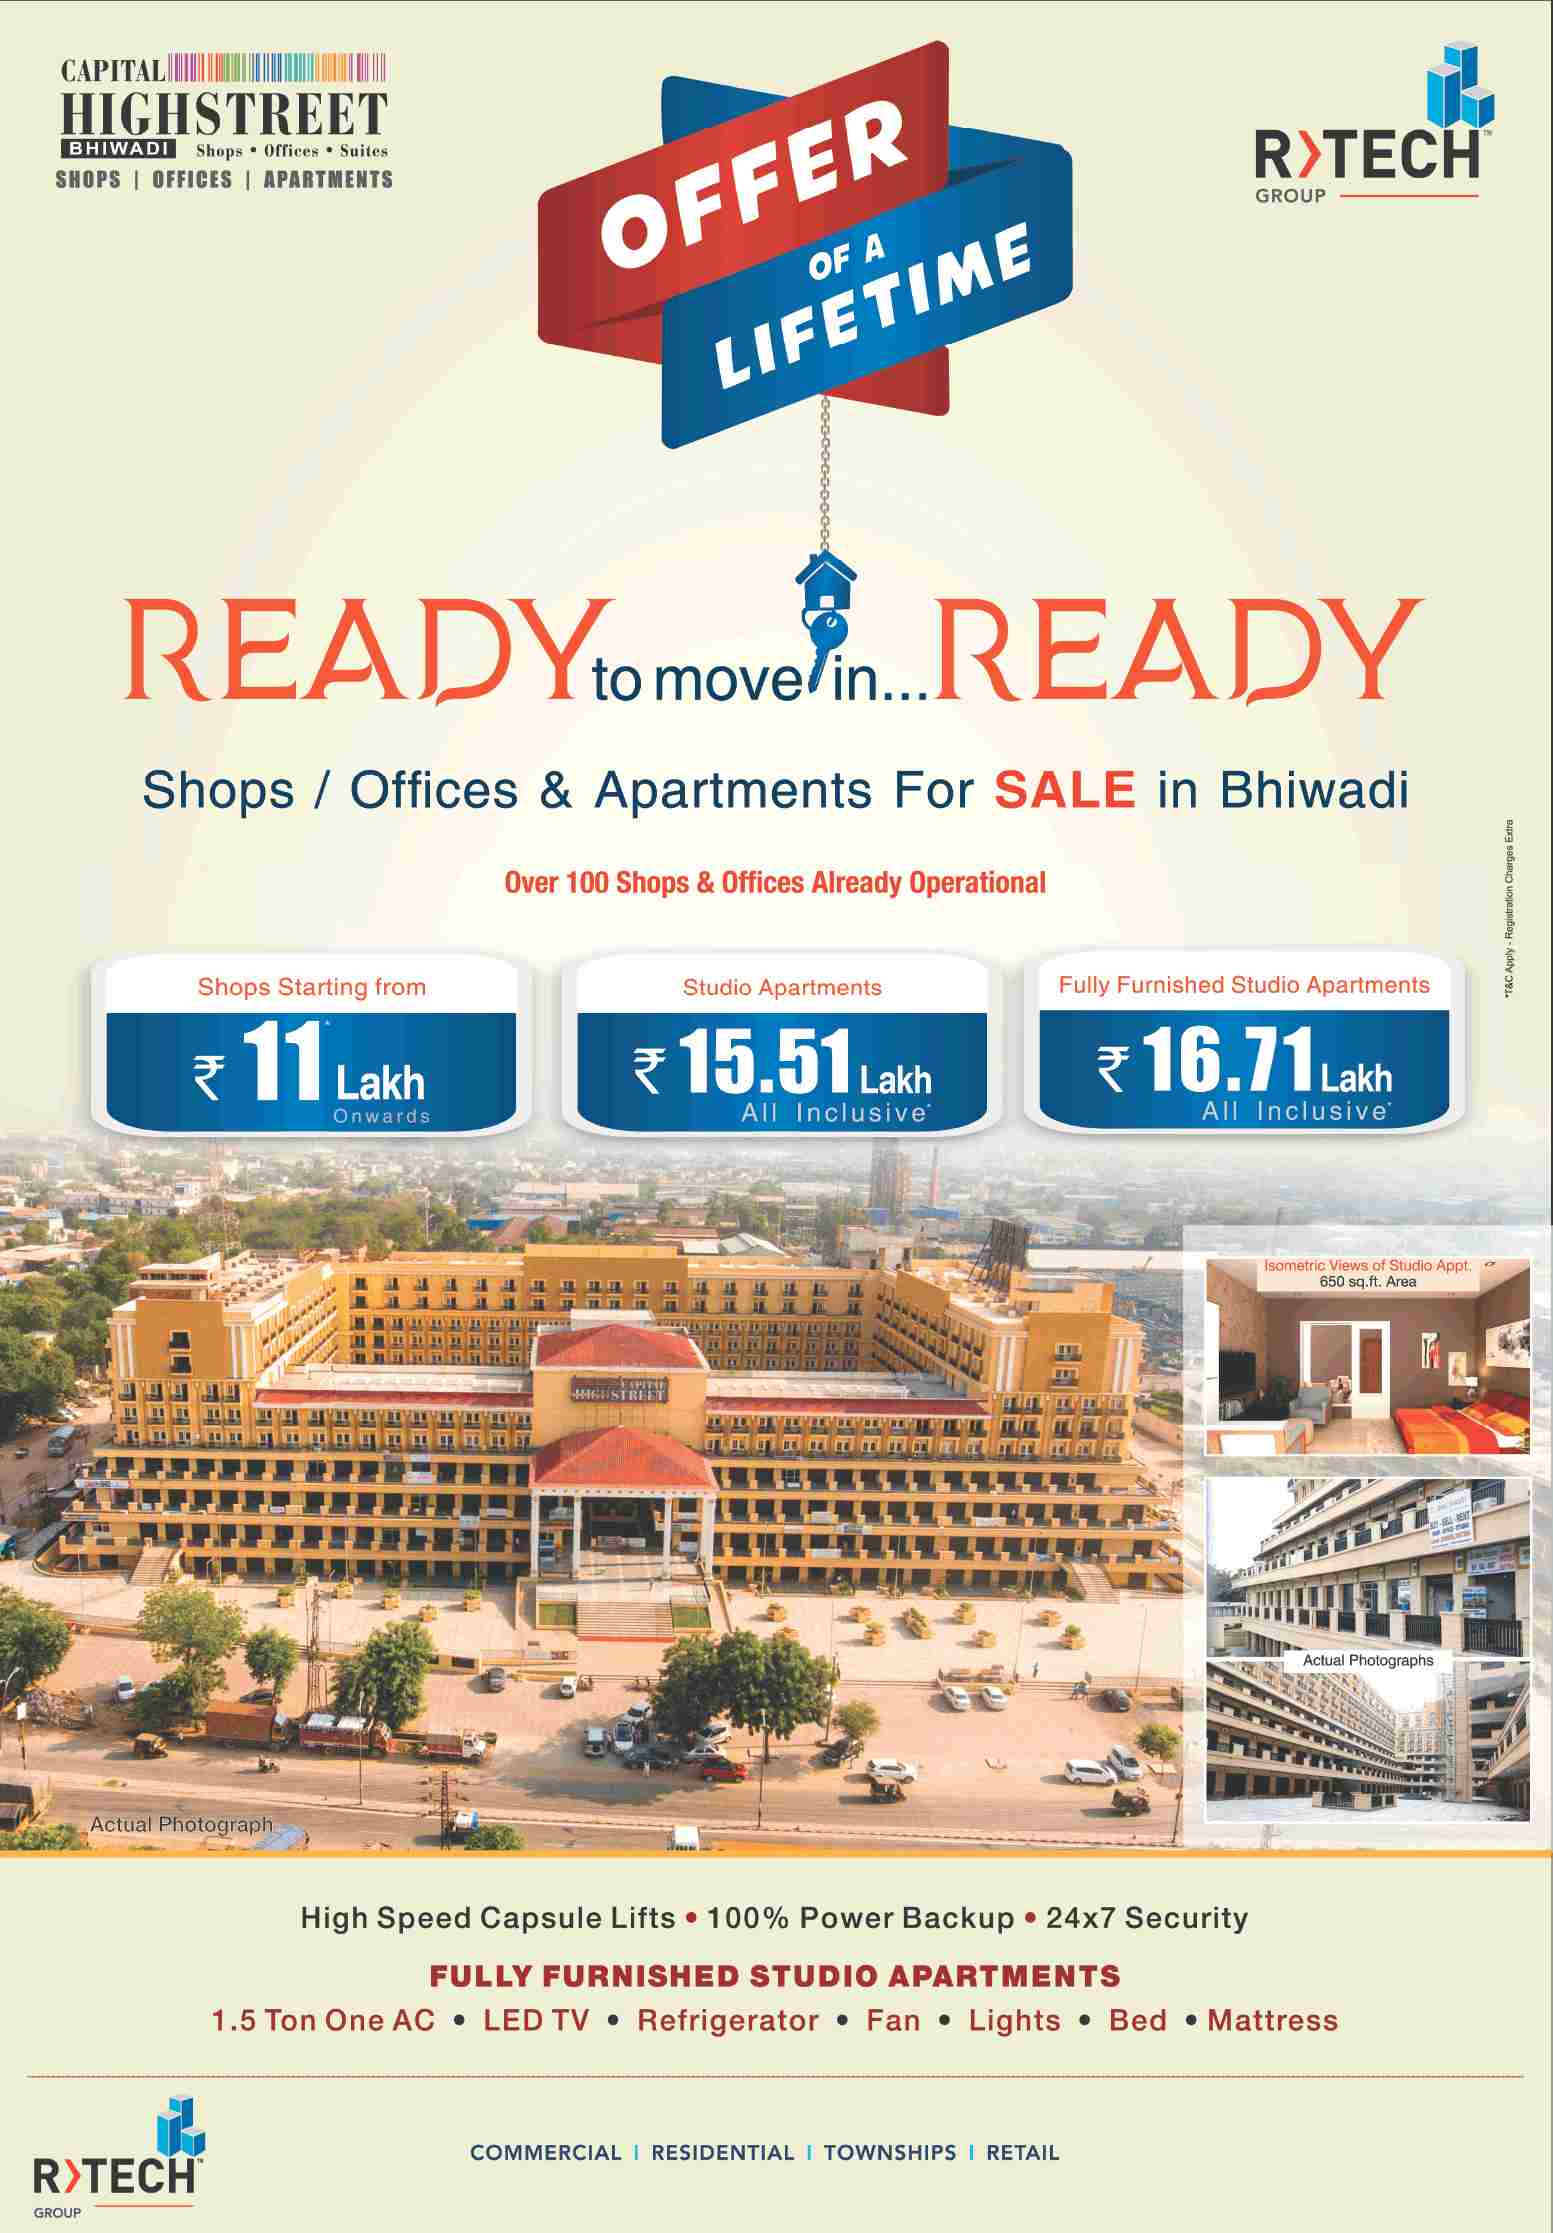 Offer of a life time with ready to move properties at R Tech Capital Highstreet in Bhiwadi